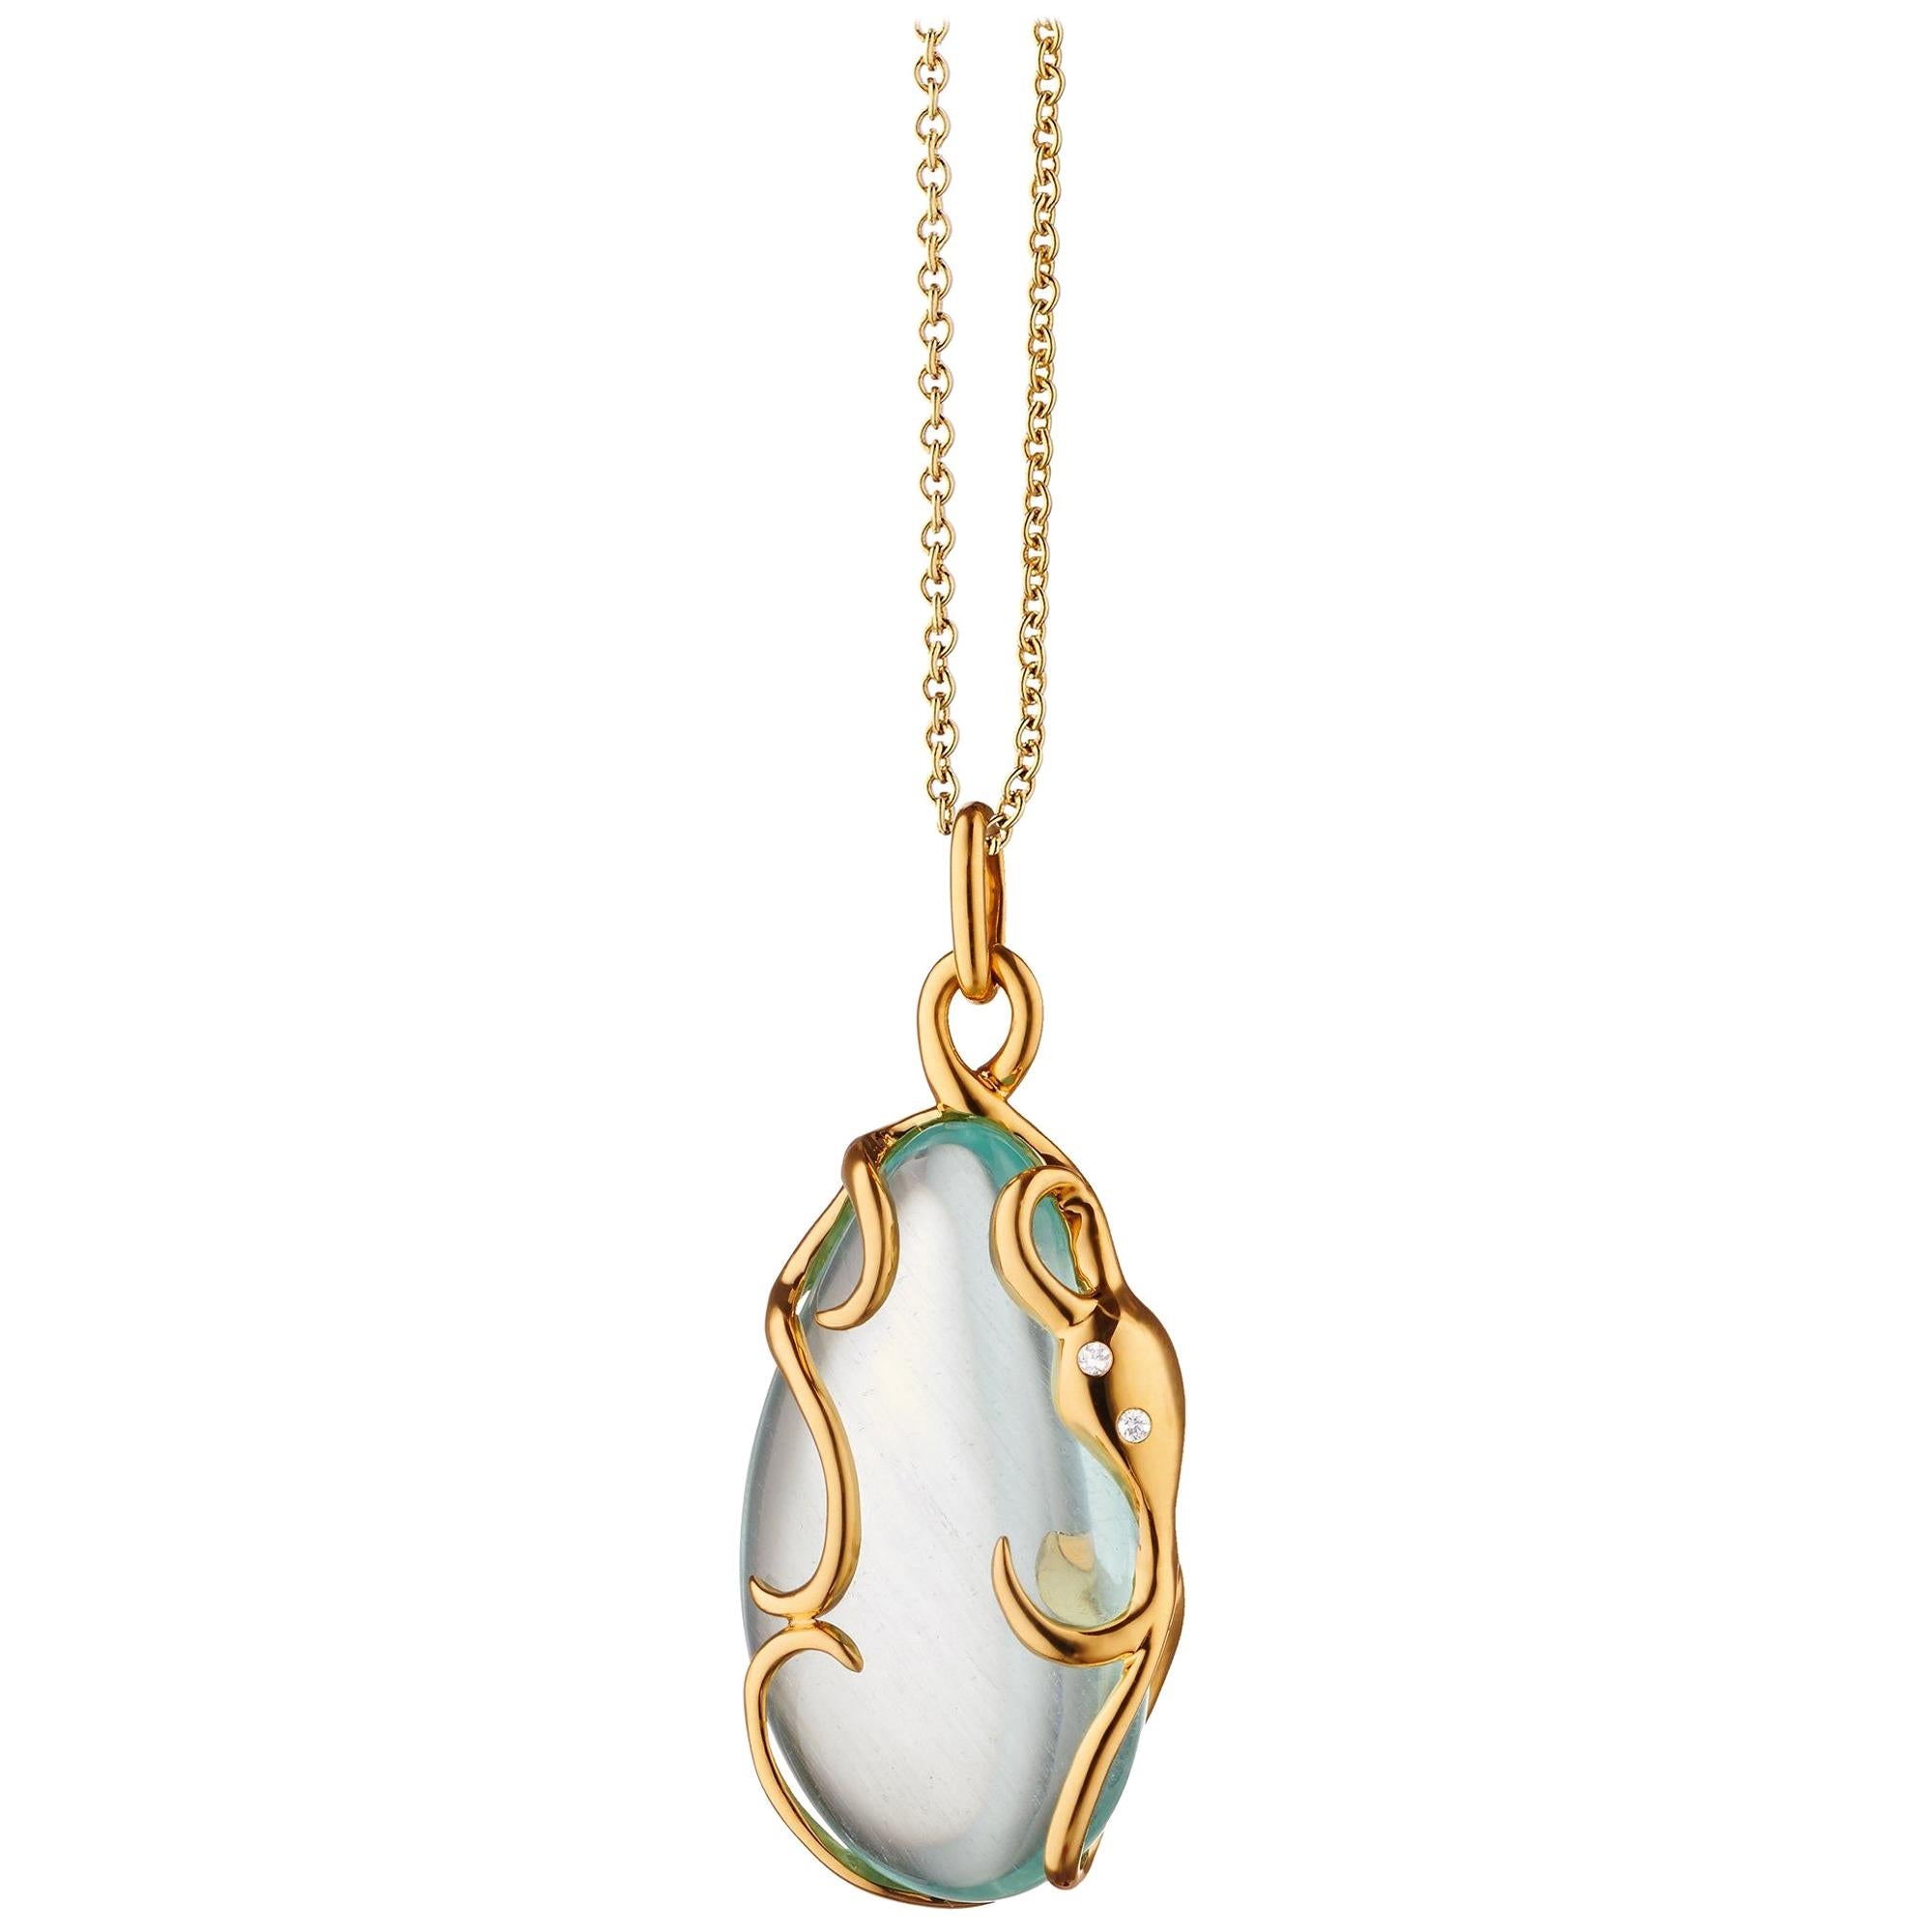 18K Yellow Gold "Intuition" Octopus Necklace with Aquamarine and Diamond accents